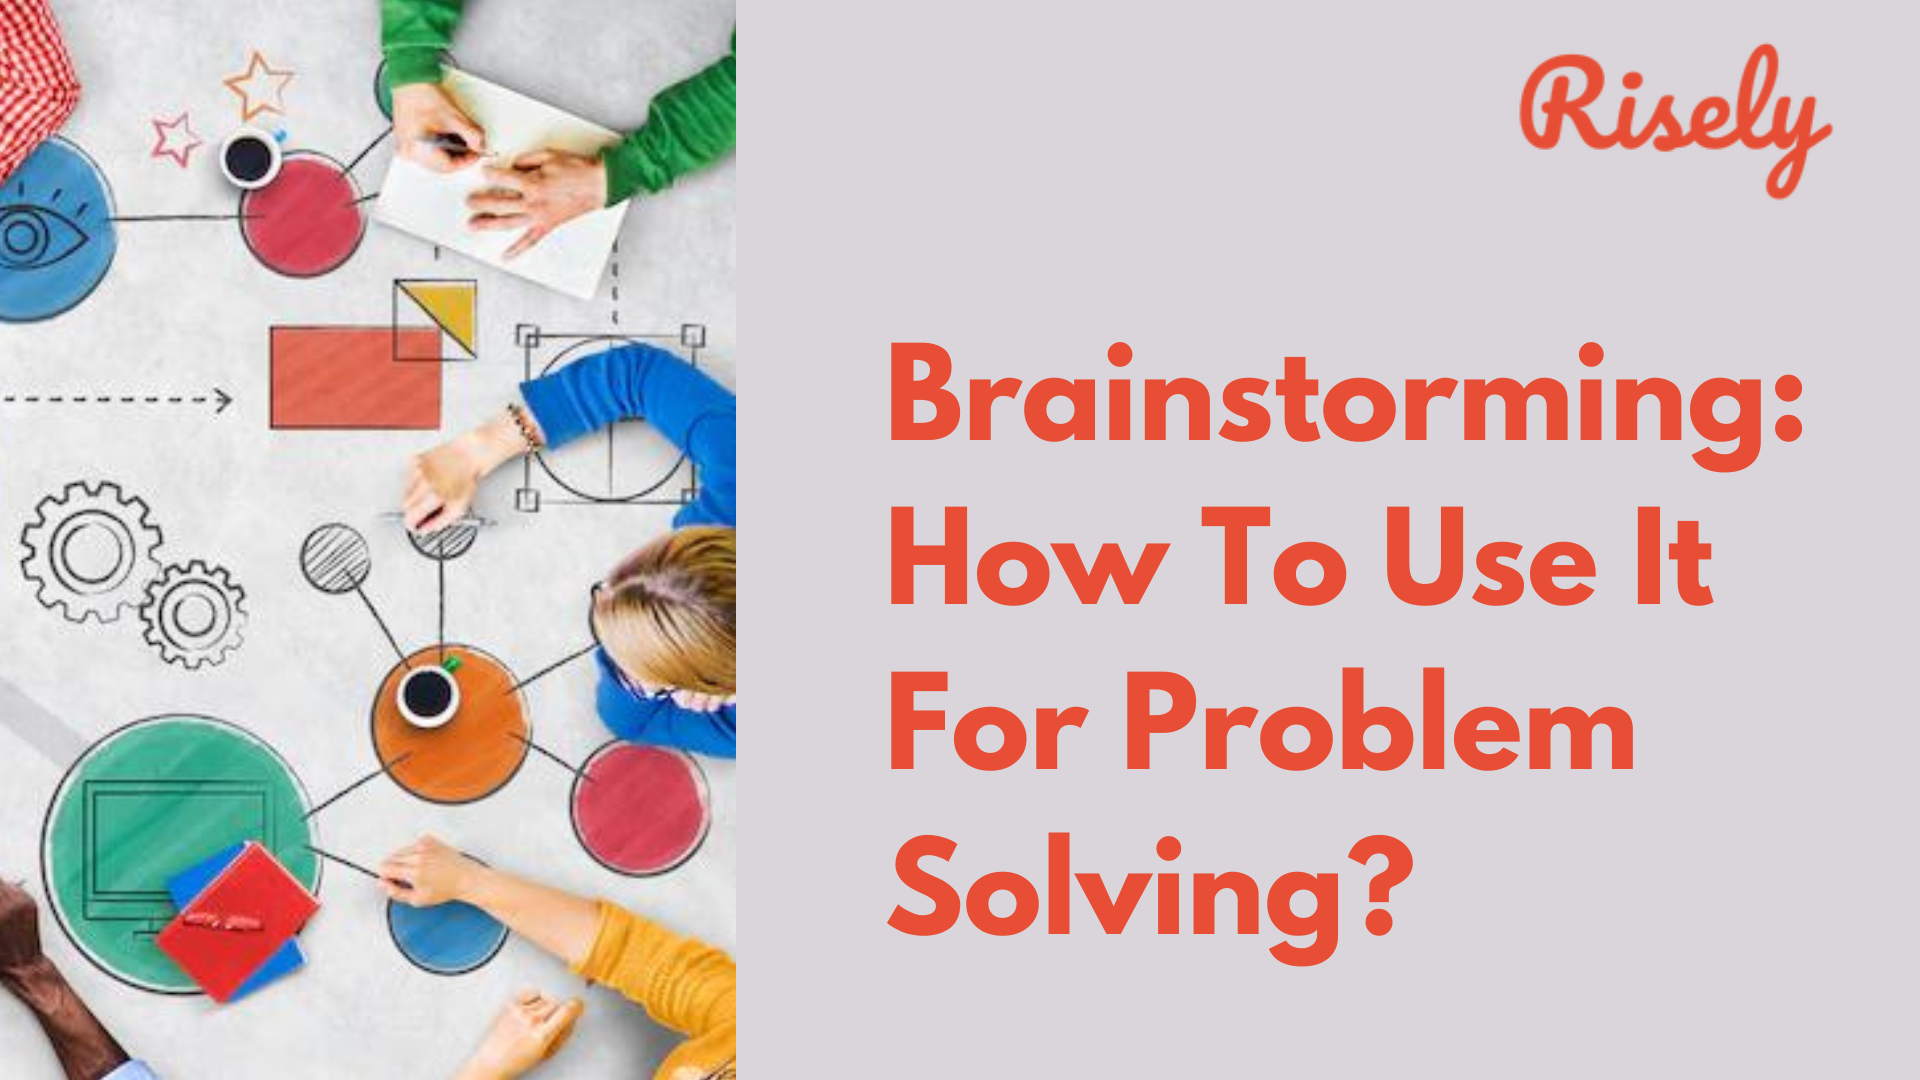 Brainstorming How To Use It For Problem Solving?